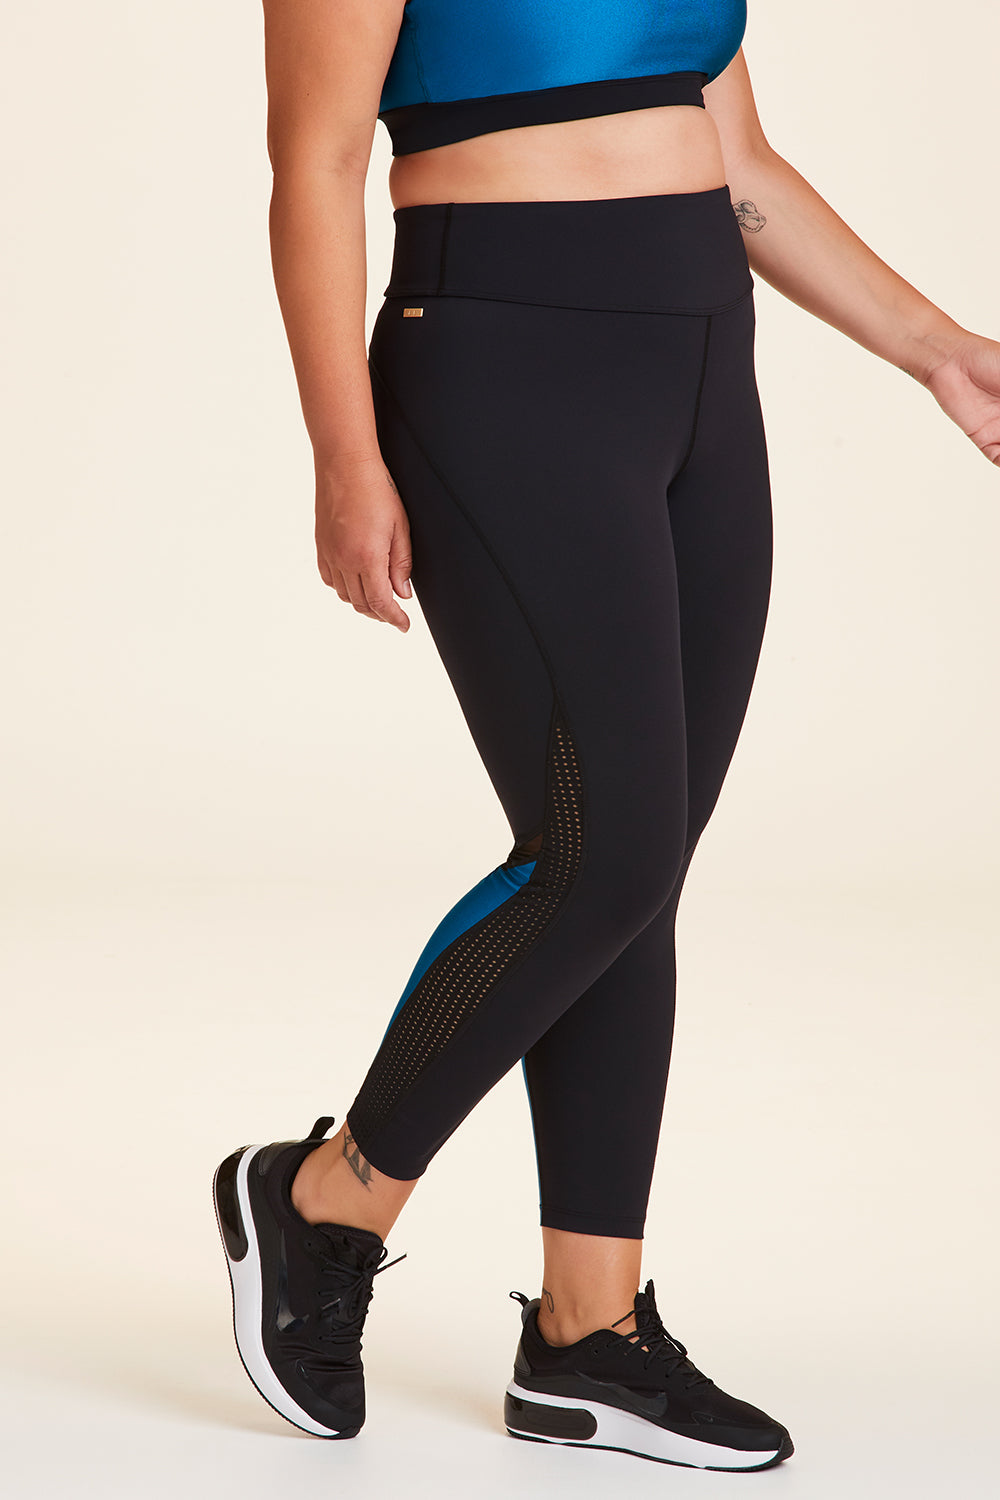 Side view of Alala Women's Luxury Athleisure black and teal 7/8 tight with minimal mesh detail in plus size